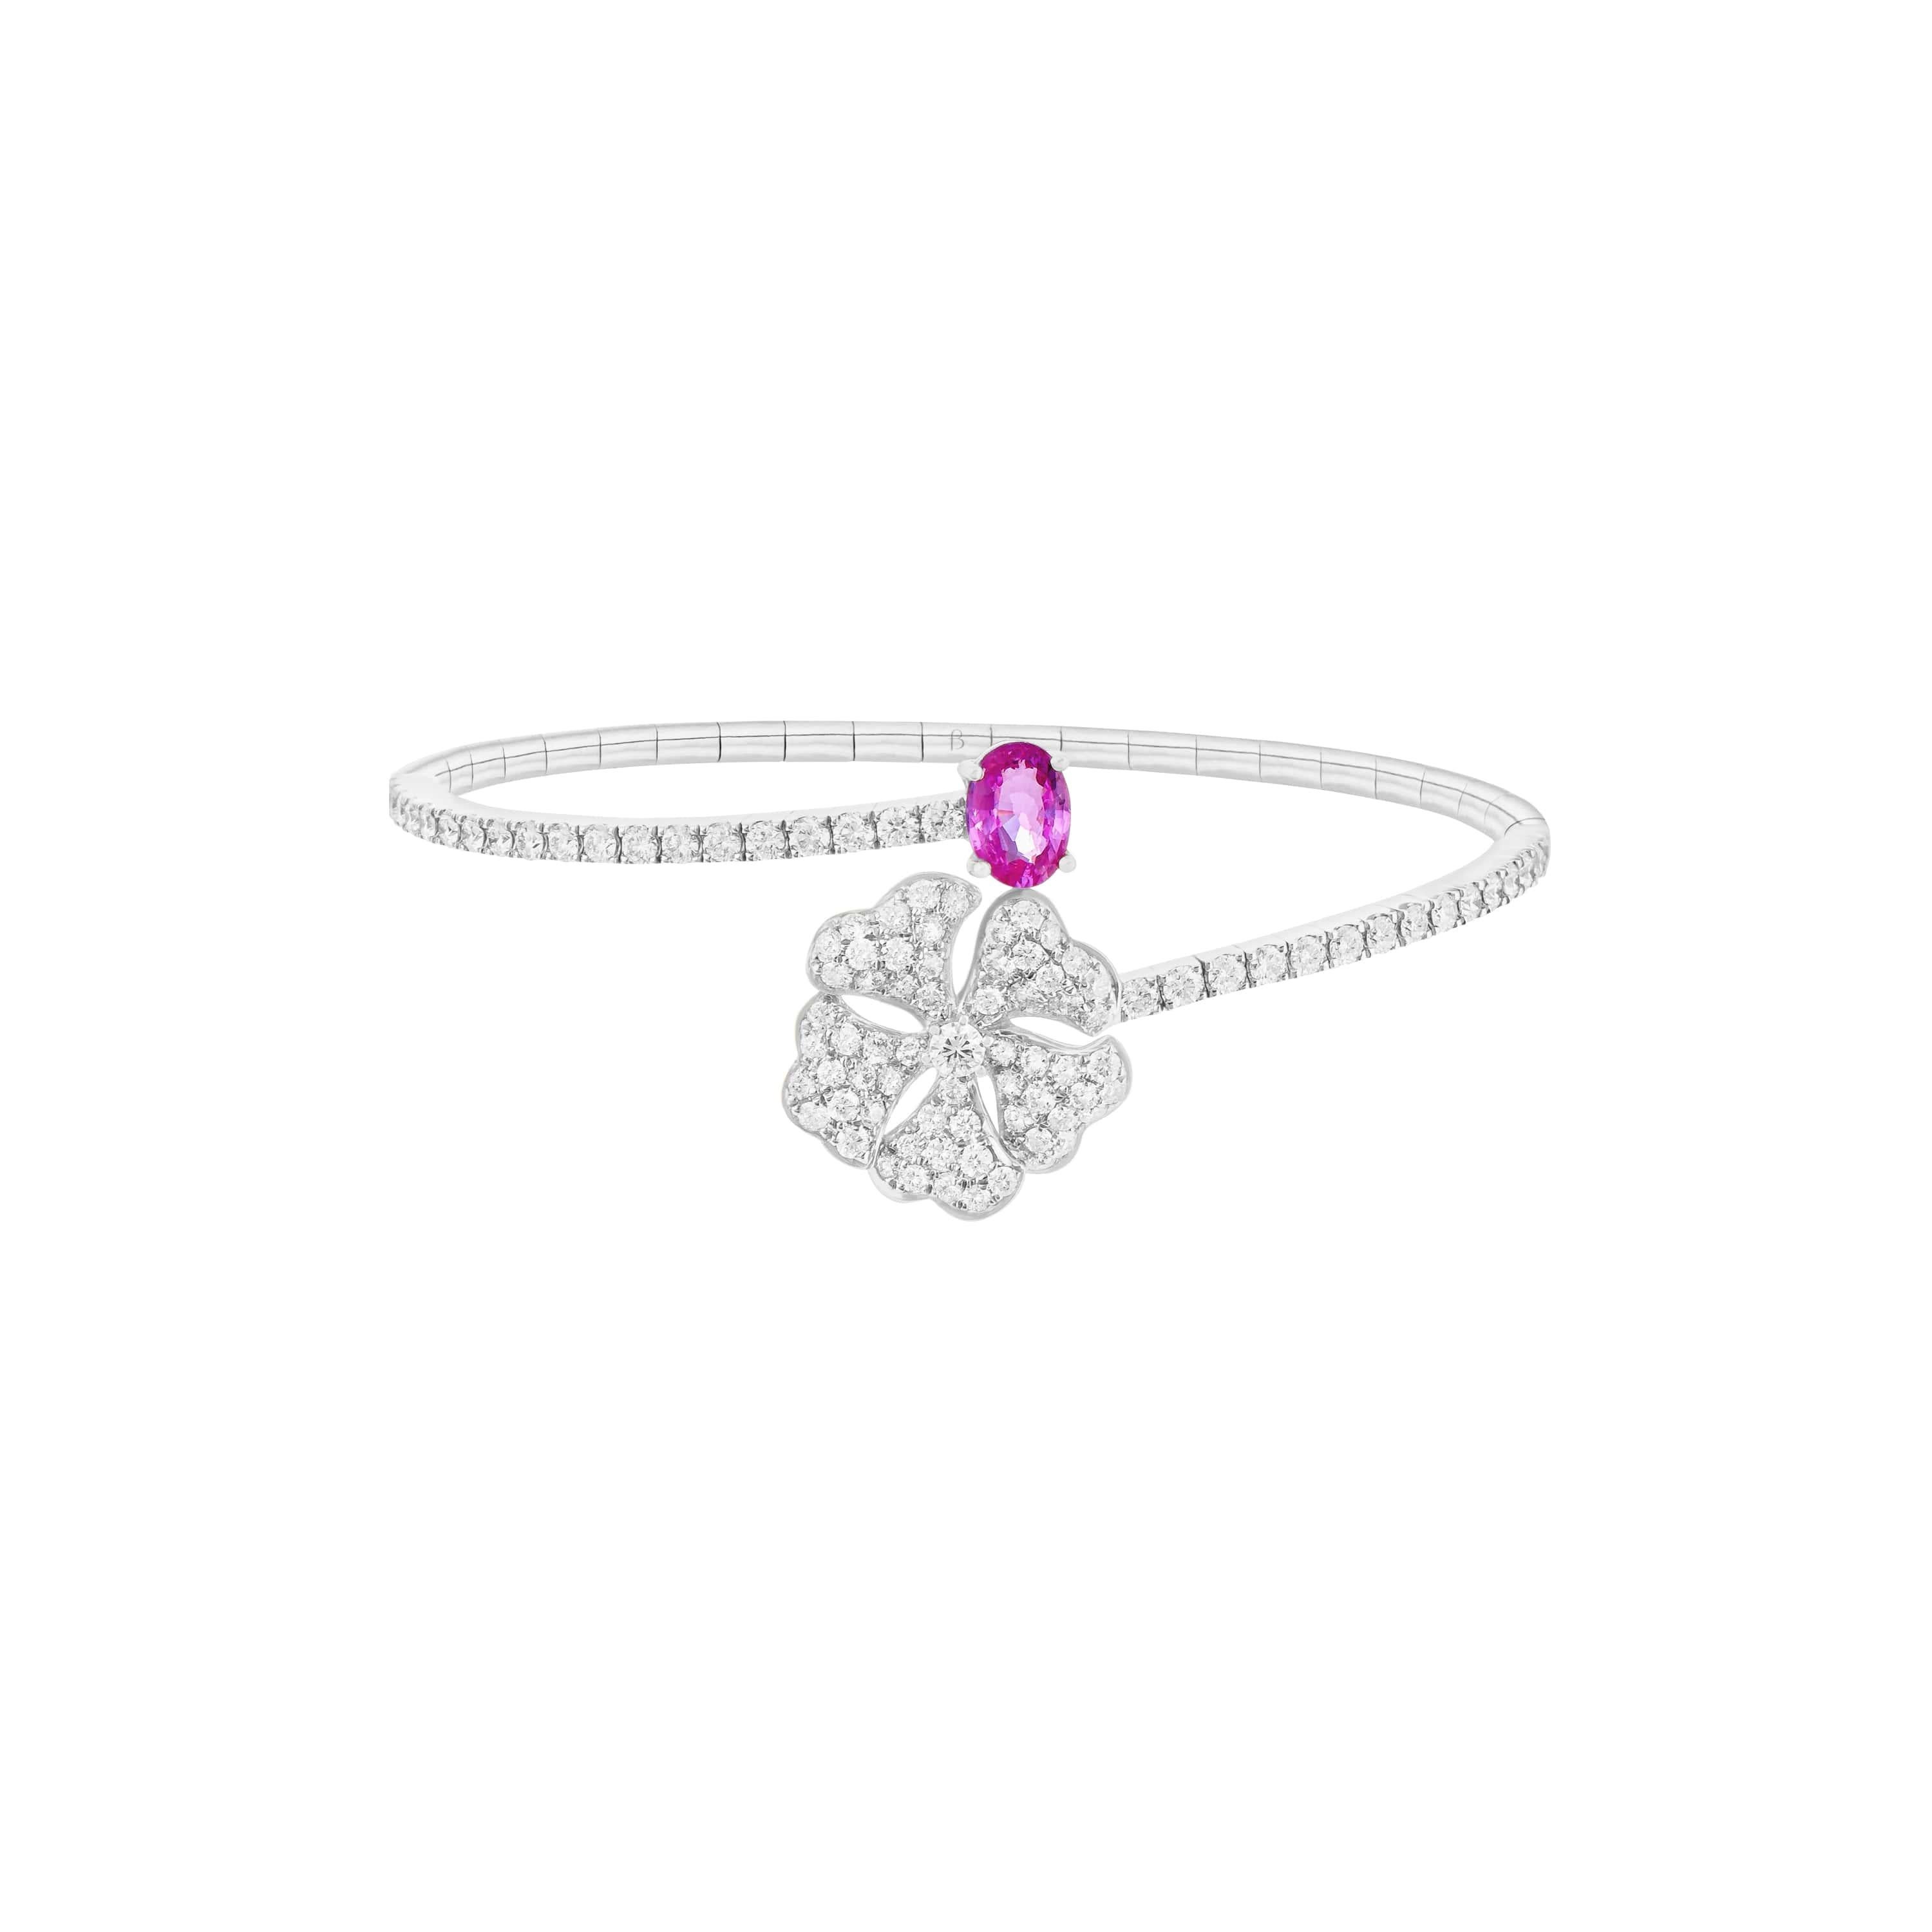 Bloom Pink Sapphire and Diamond Open Spiral Bangle in 18K White Gold

Inspired by the exquisite petals of the alpine cinquefoil flower, the Bloom collection combines the richness of diamonds and precious metals with the light versatility of this